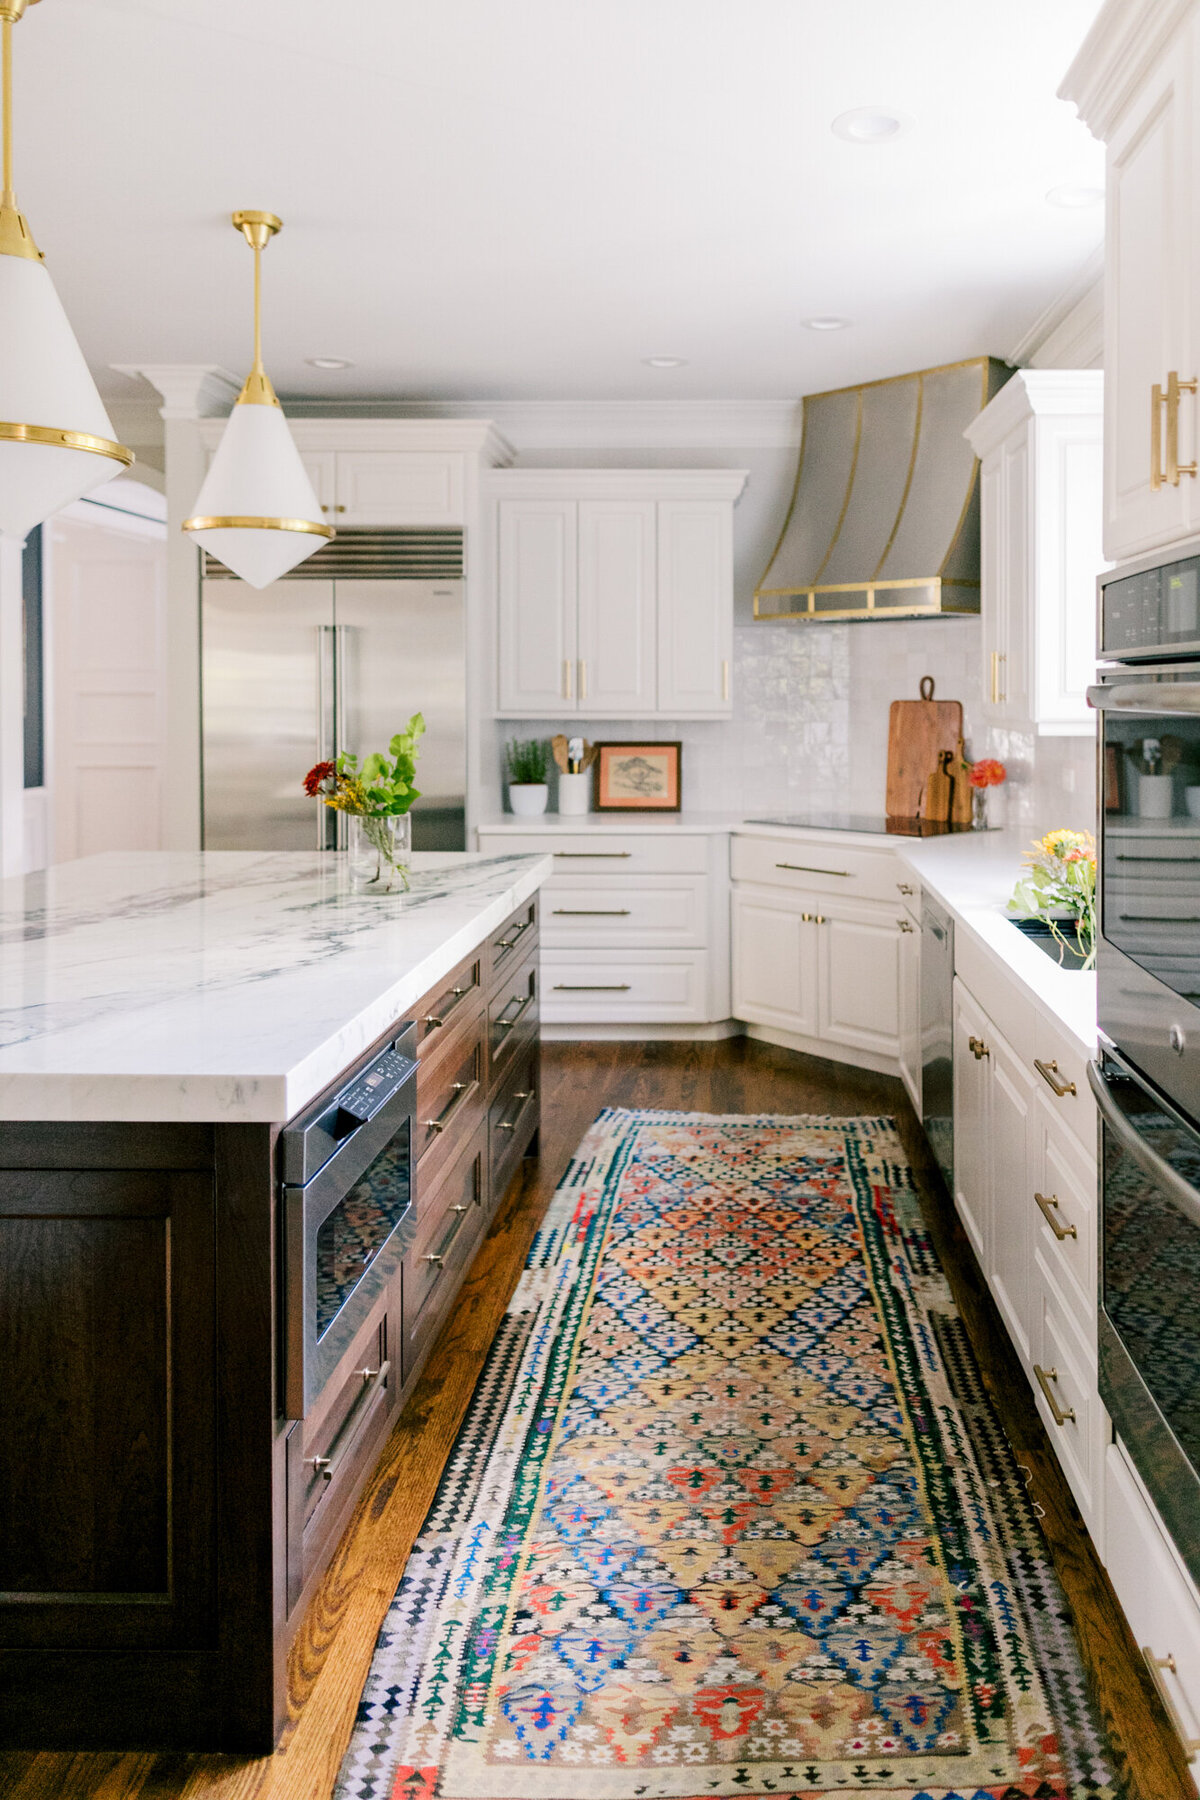 A beautiful kitchen in a historic Glen Ellyn home designed by The Modern Shag